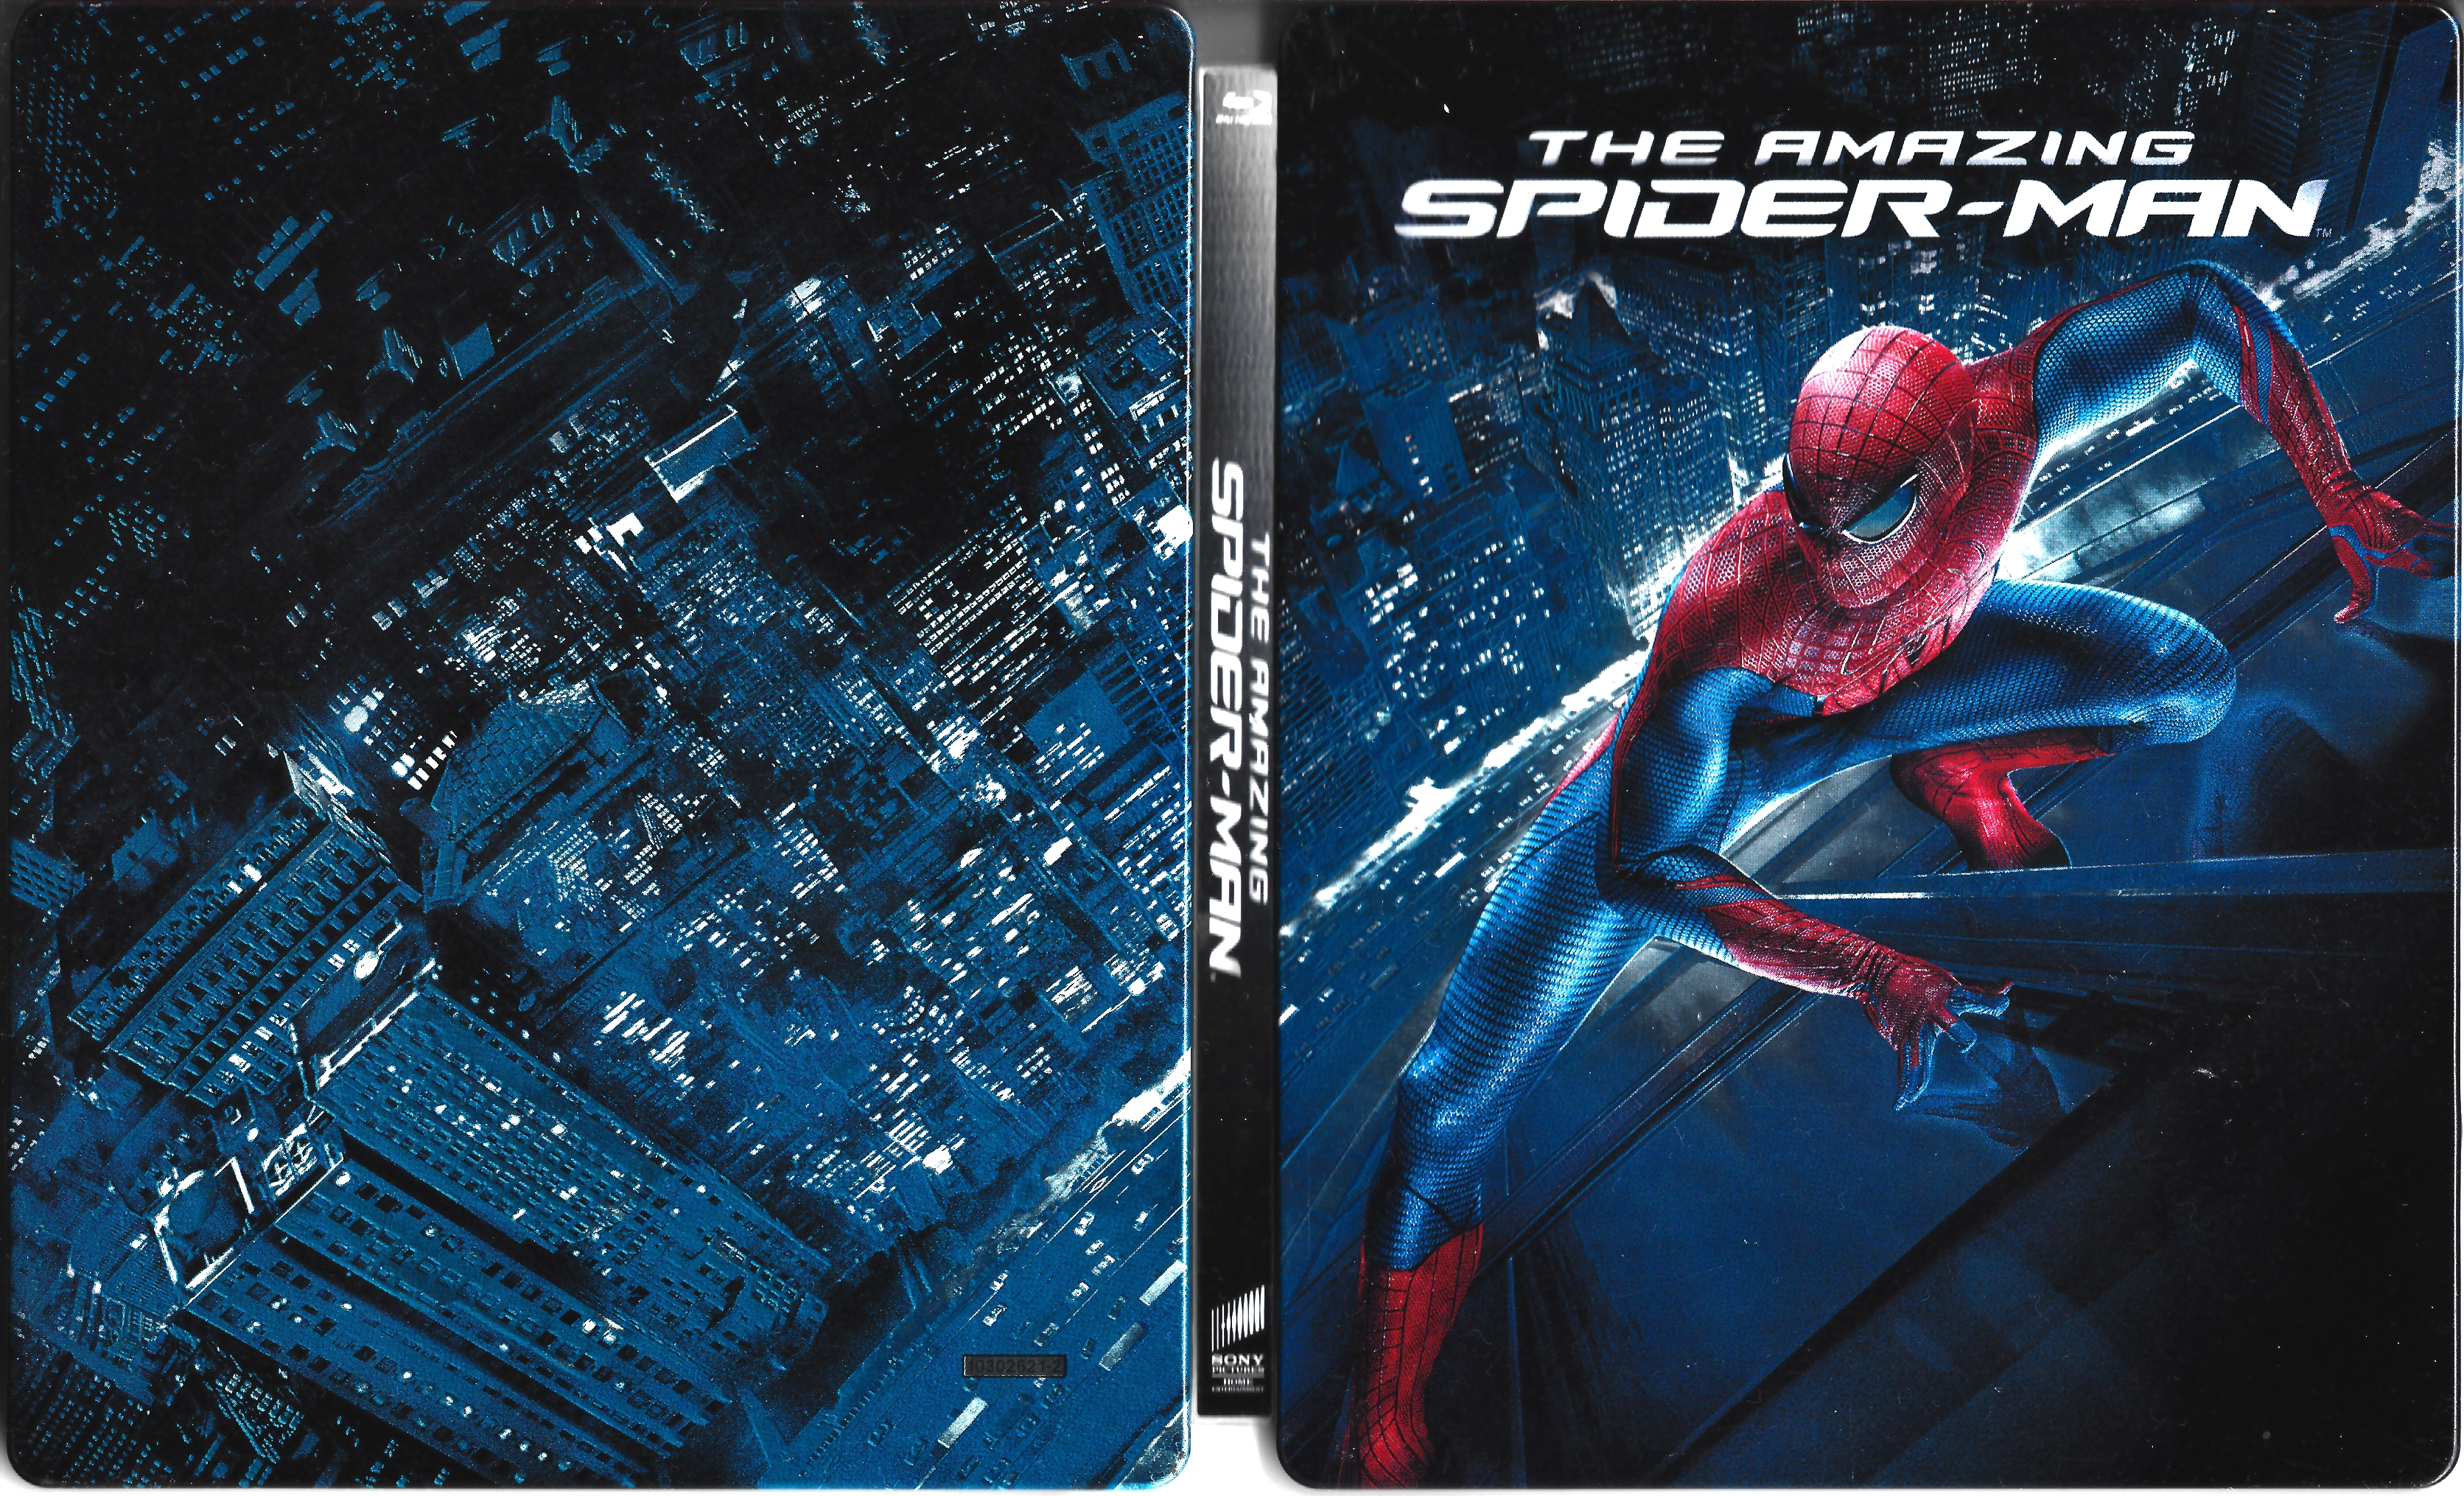 Jaquette DVD The Amazing Spider-Man (BLU-RAY) v4